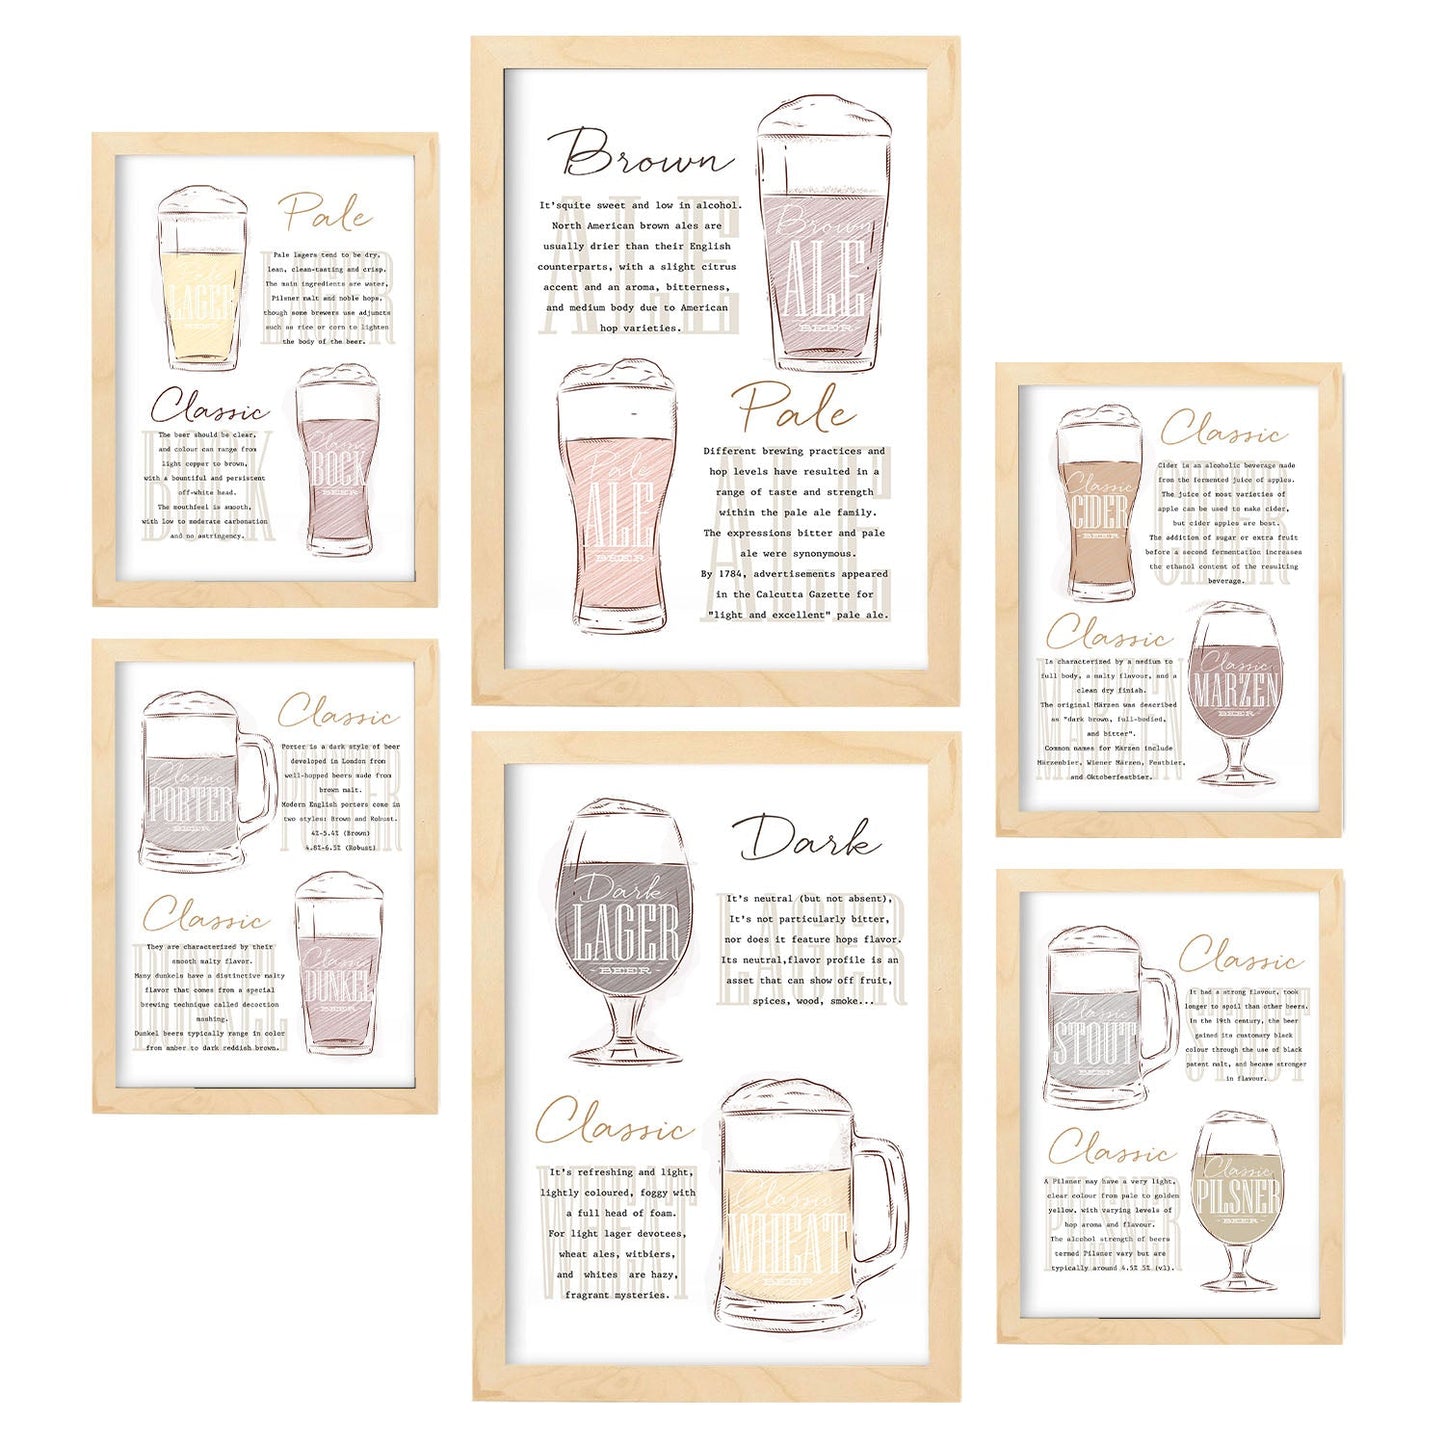 Nacnic TIPOS CERVEZA. Aesthetic Wall Art Prints for Bedroom or Living Room Design.